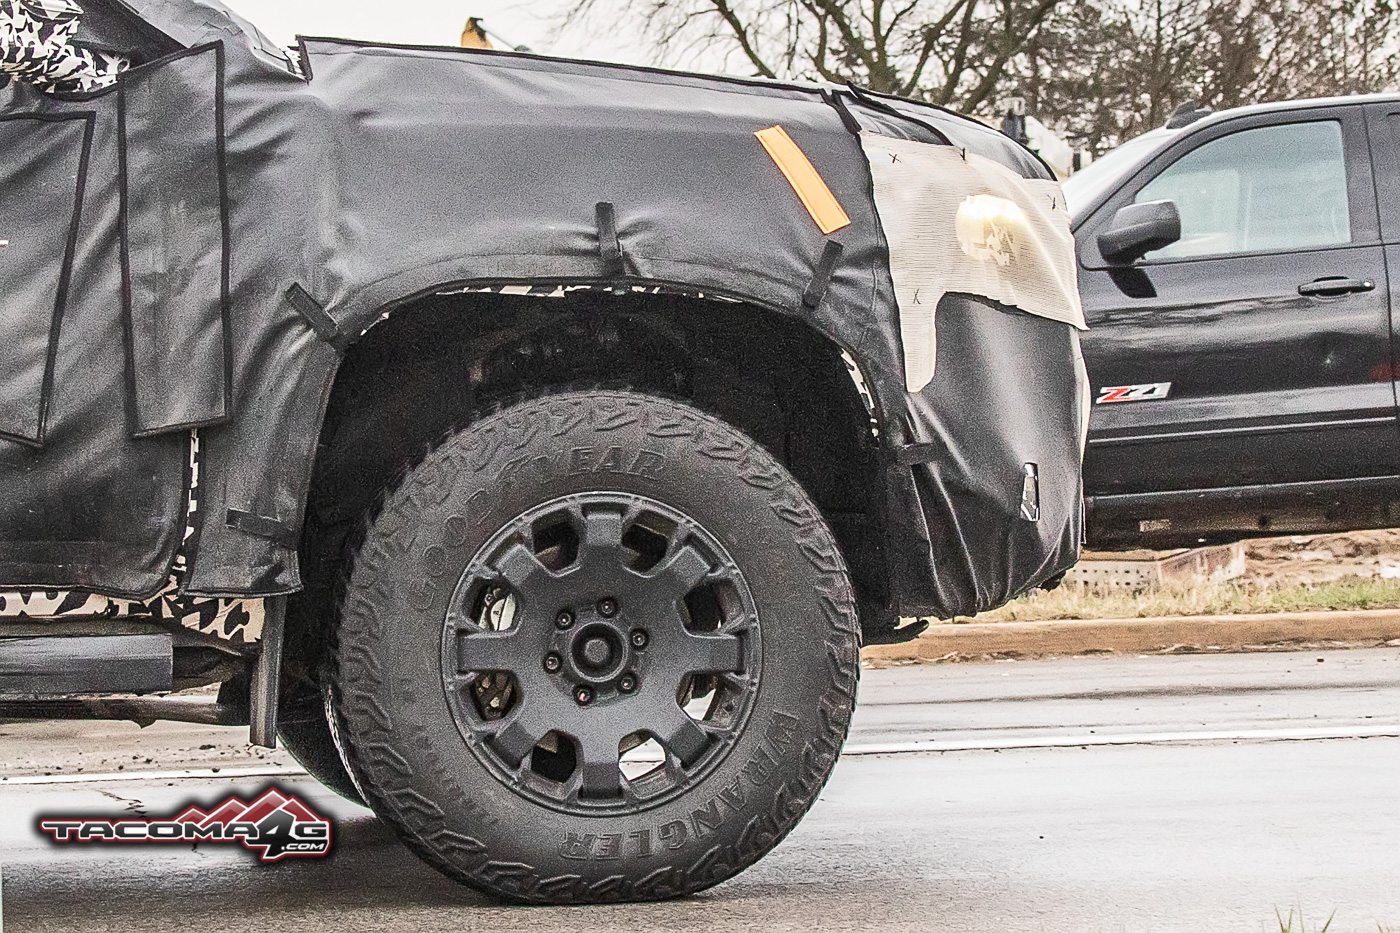 2024 Tacoma Spied: 2024 Toyota Tacoma TRD Pro / Trailhunter Prototype 1st Sighting Reveals Rugged Off-Road Details + Rear Disc Brakes 📸 2024-toyota-tacoma-trd-pro-prototype-11